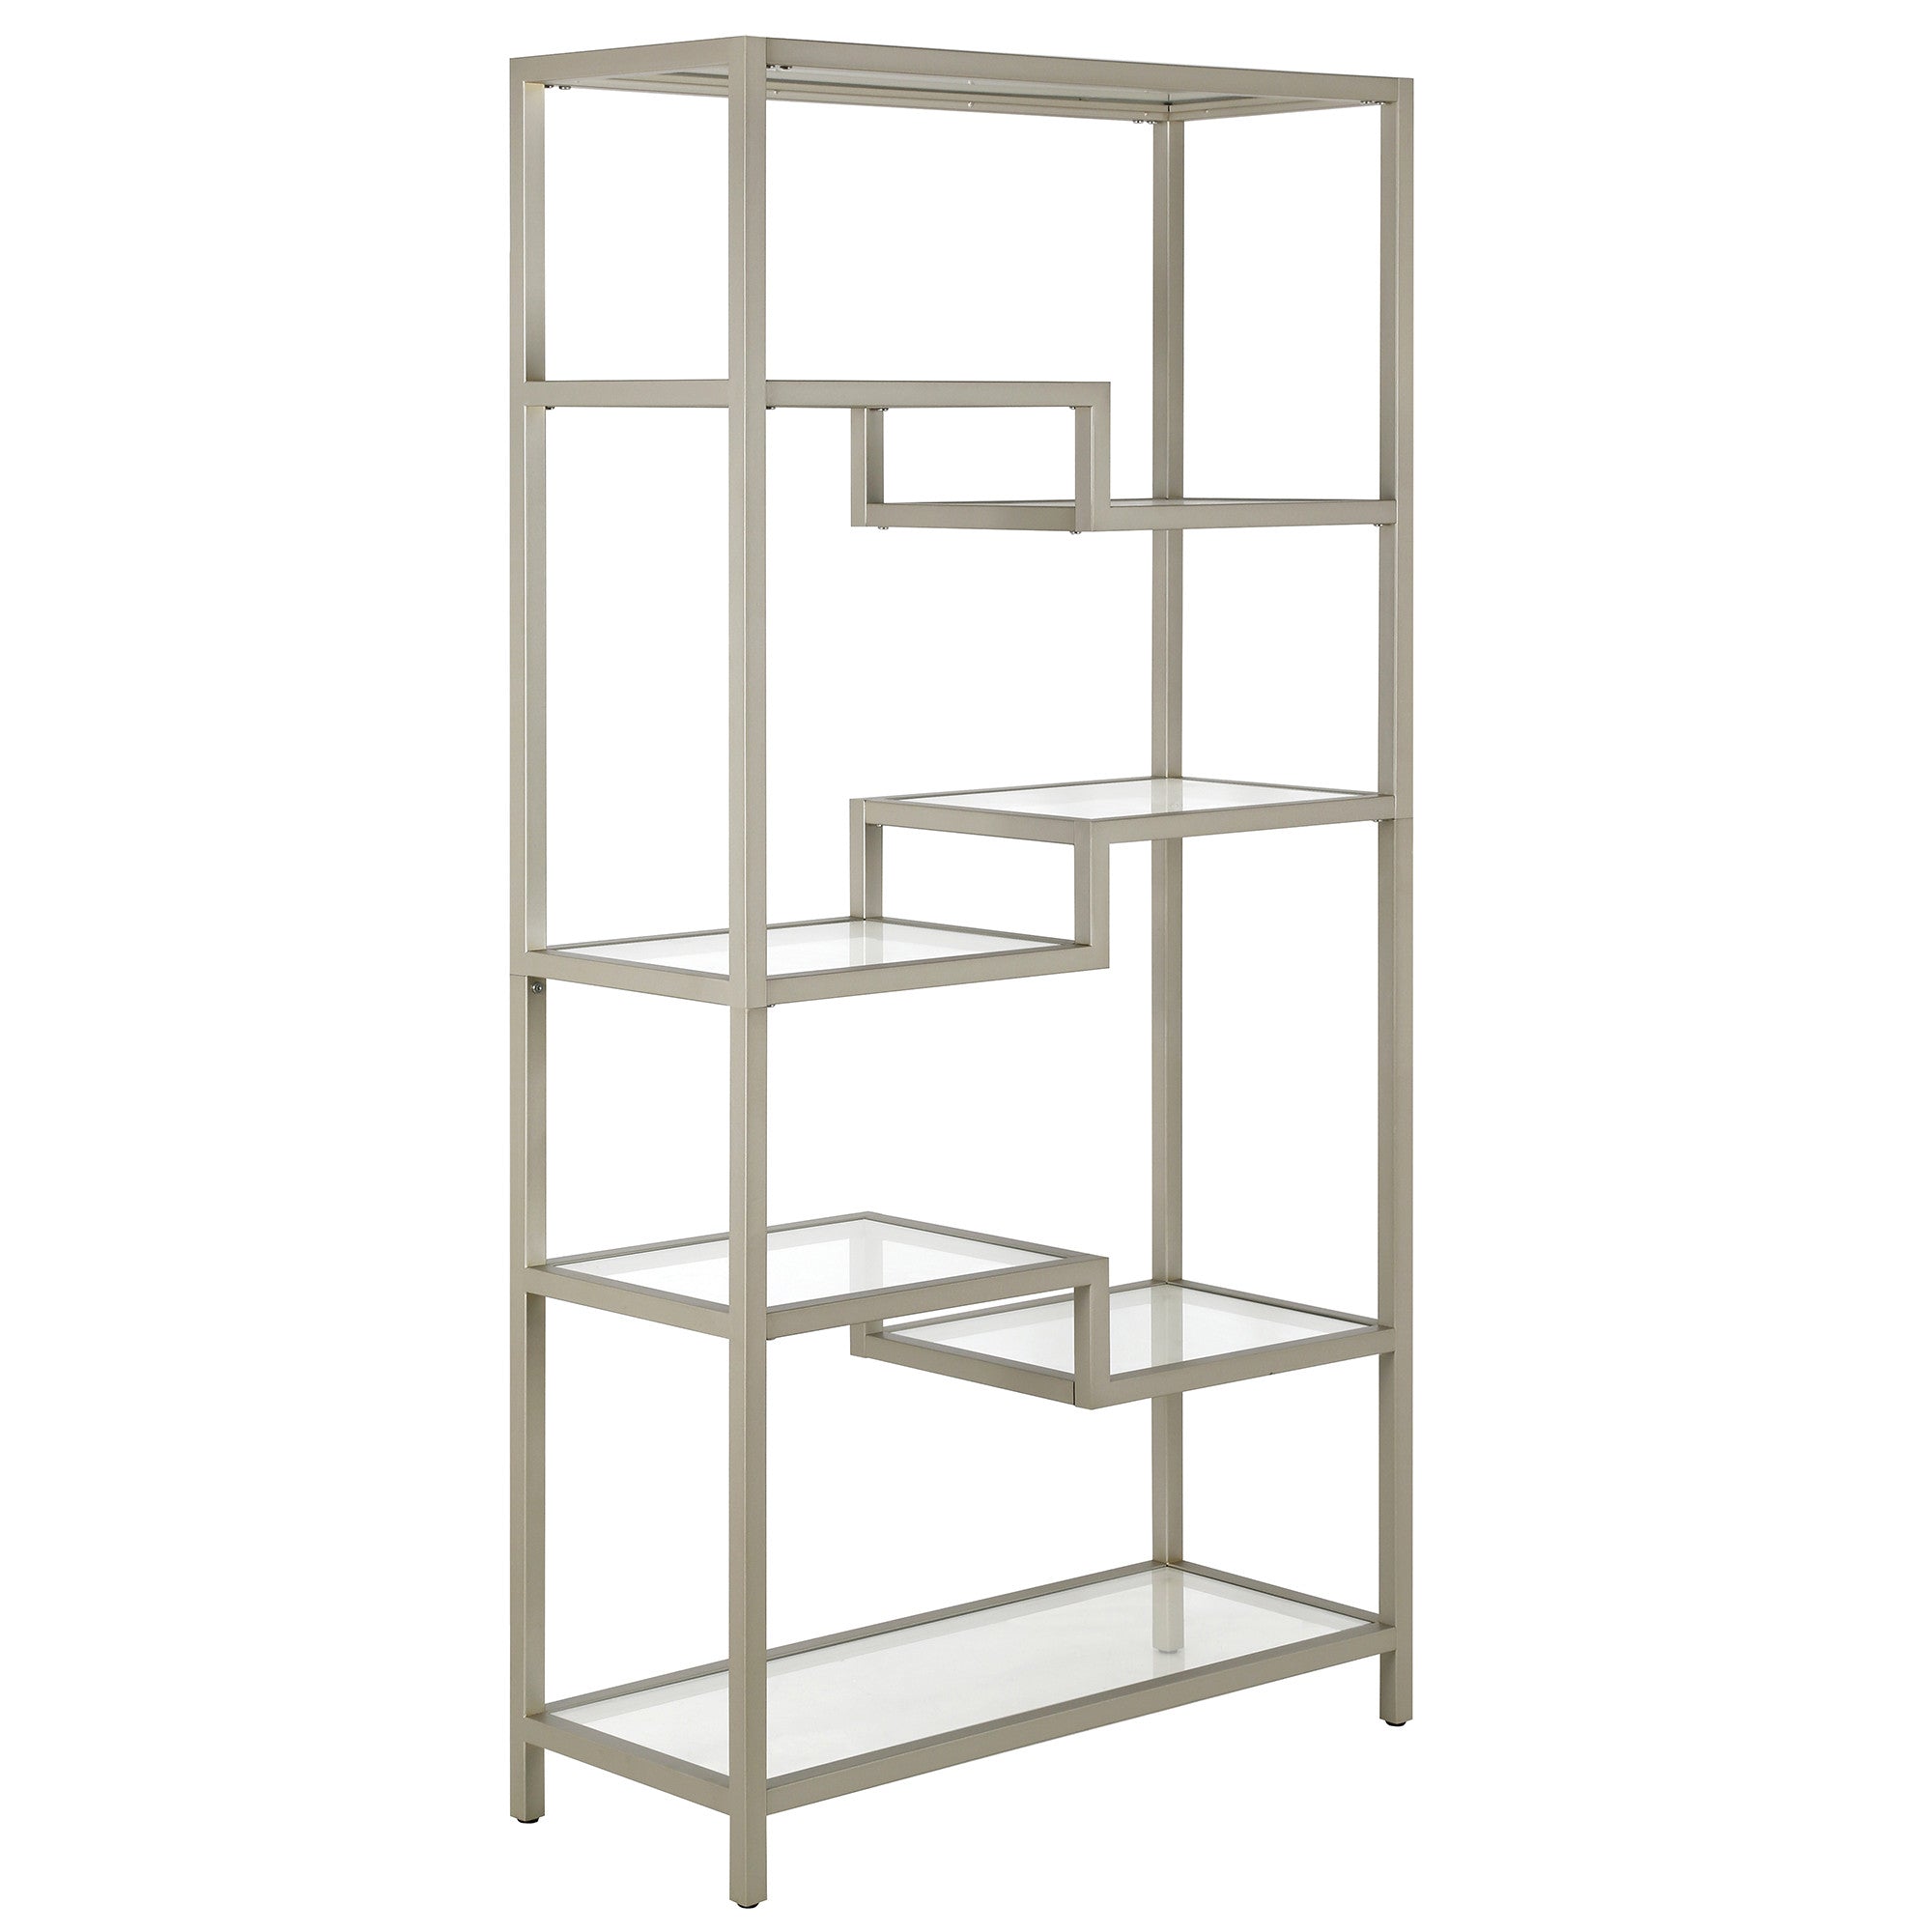 68" Silver Metal and Glass Seven Tier Etagere Bookcase